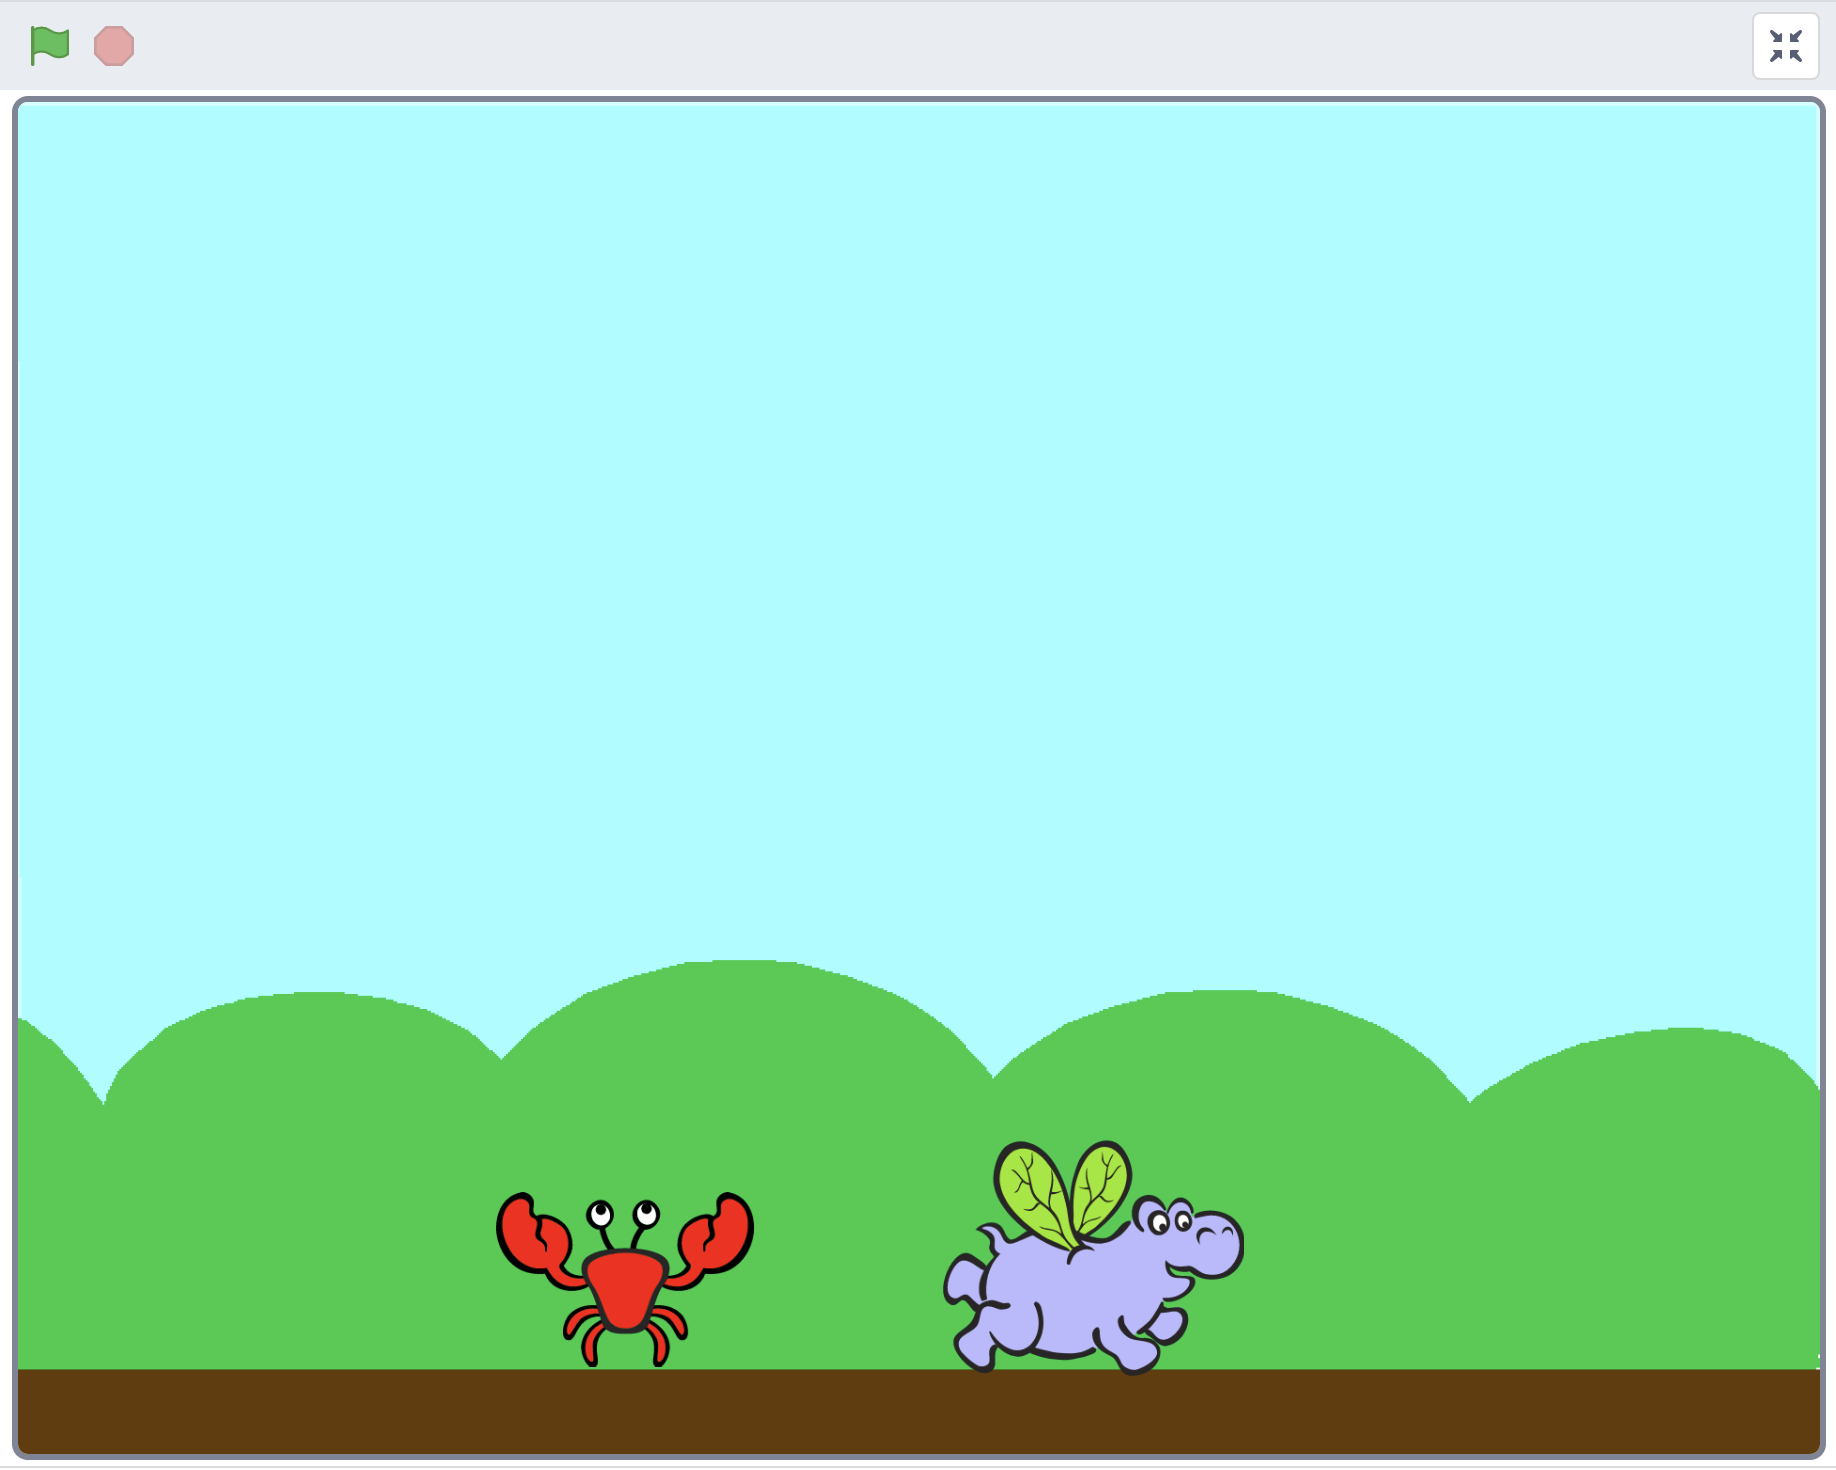 Scratch project stage depicting a crab and a hippo in a jungle.